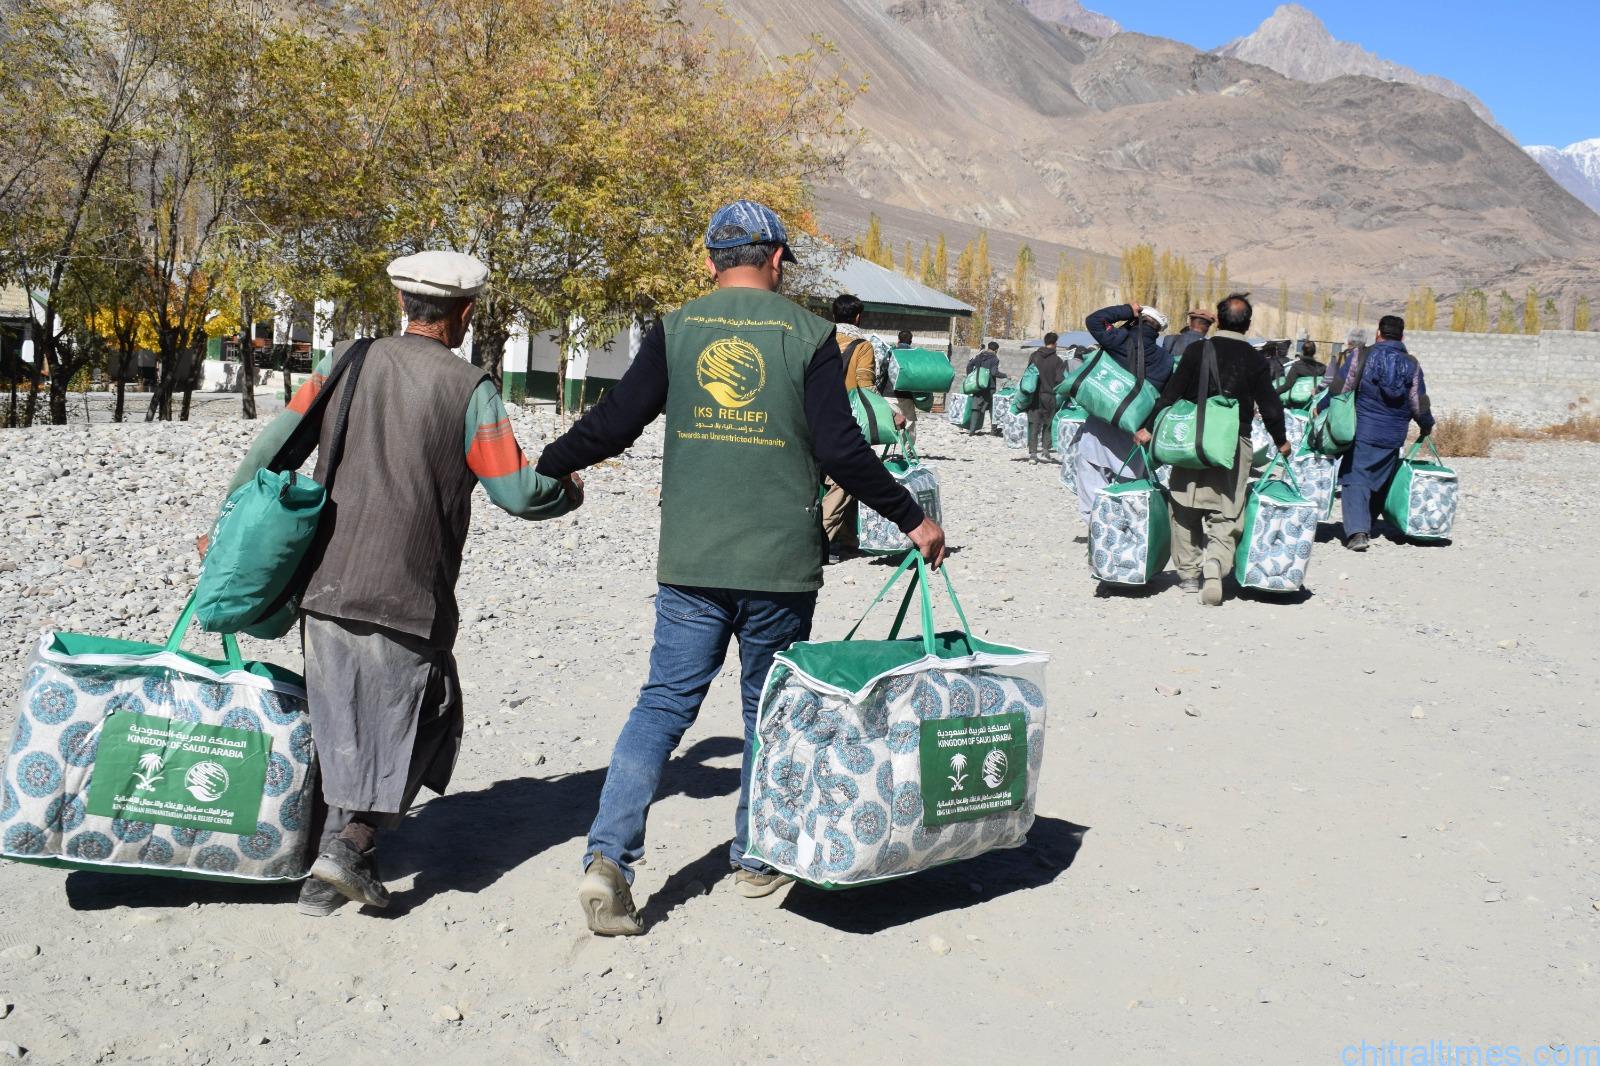 chitraltimes king salman relief goods distributed in kp districts including chitral lower and upper